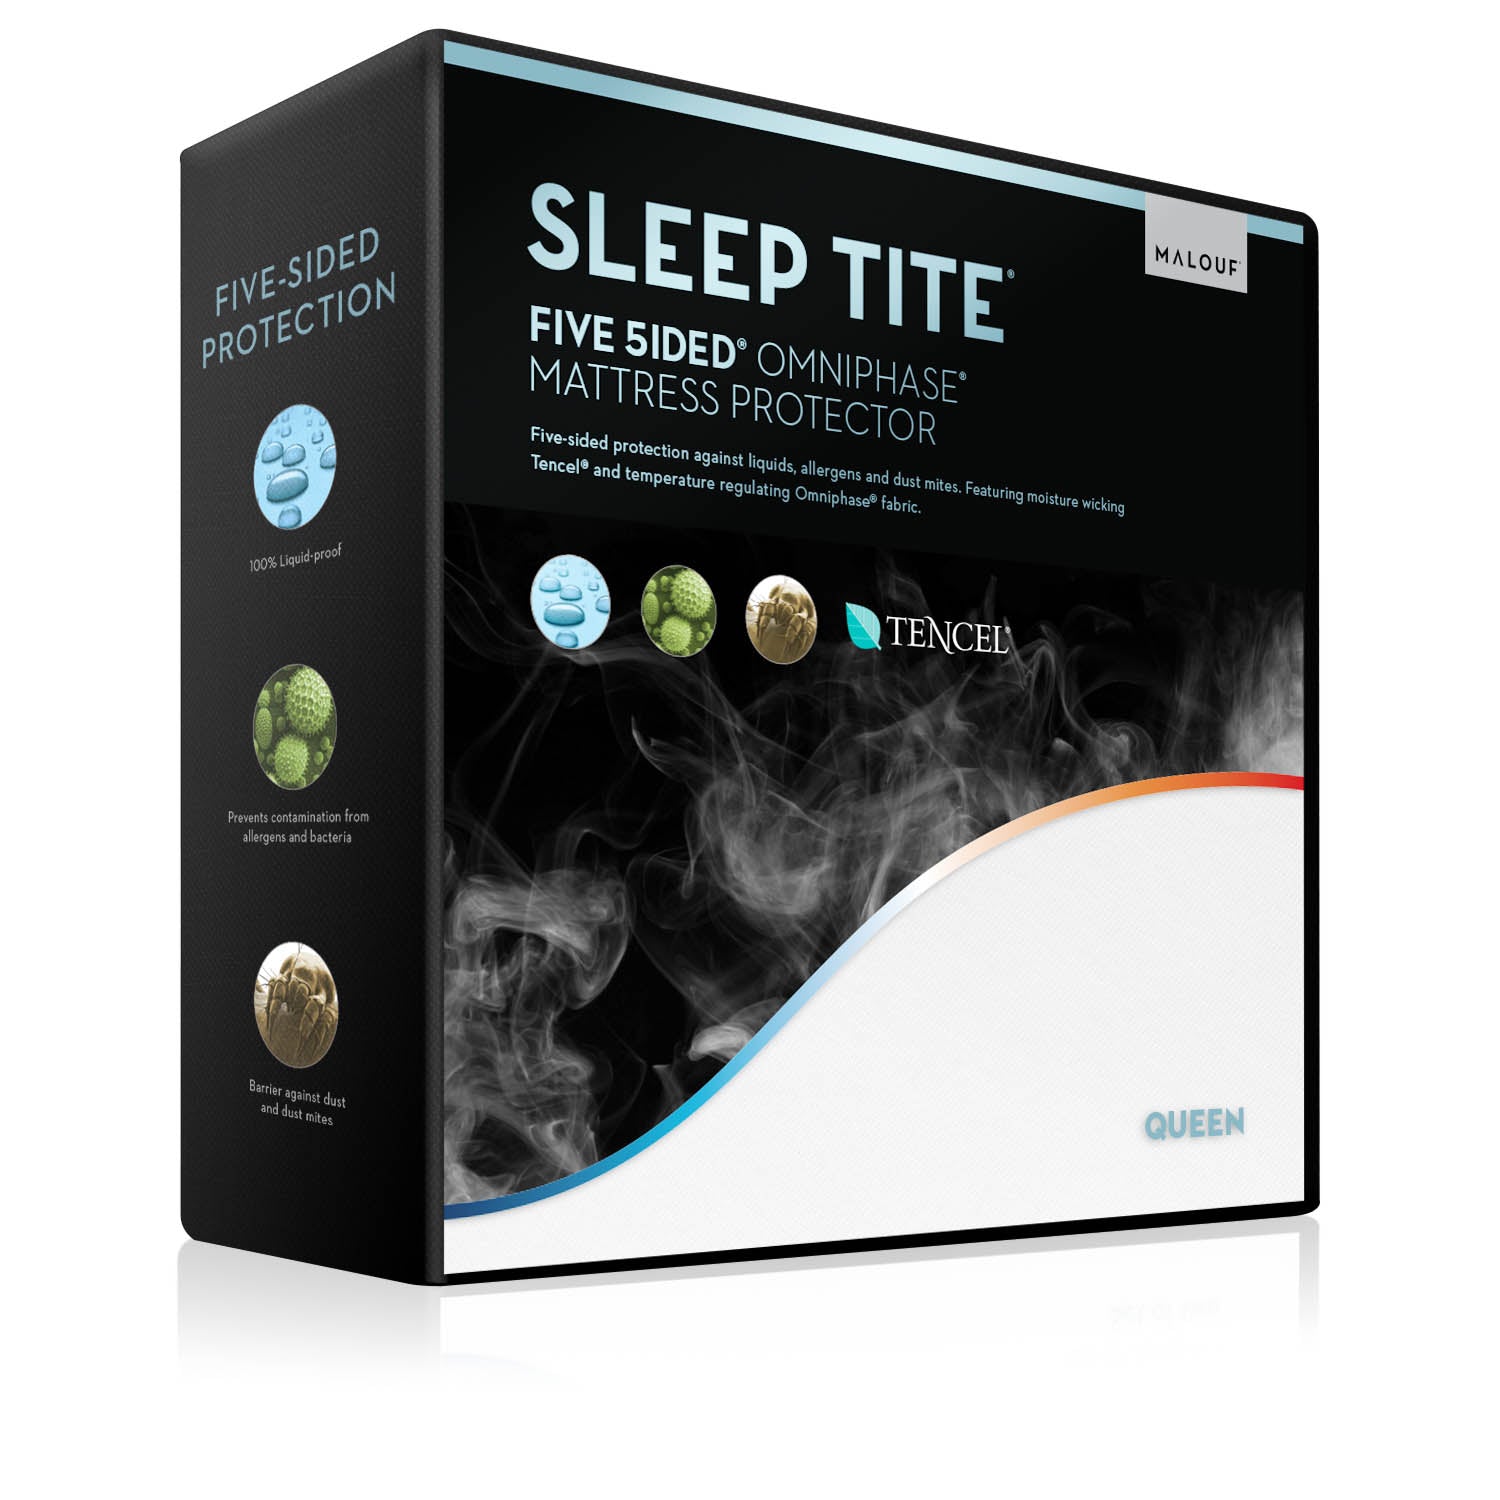 Sleep Tite FIVE 5IDED® Mattress Protector with Tencel™ + Omniphase®